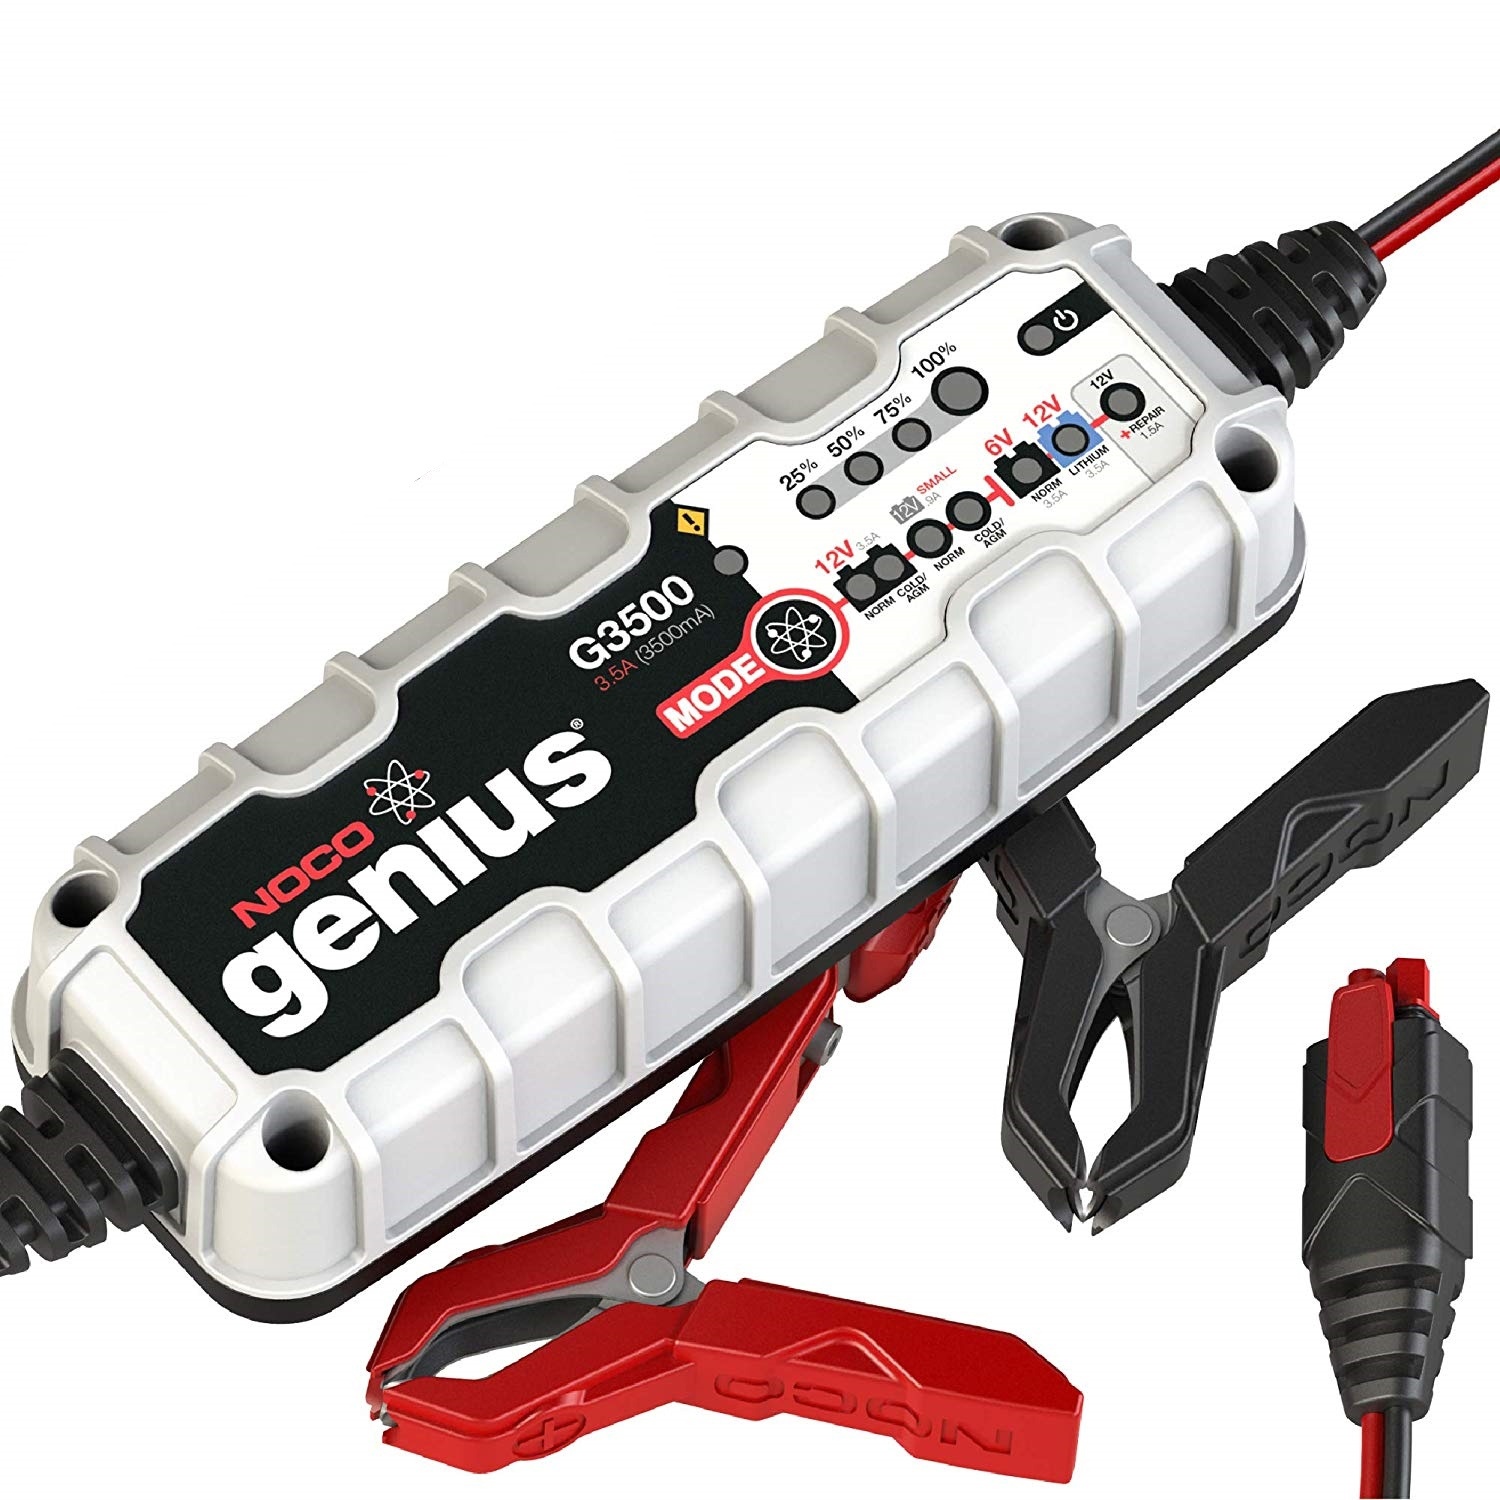 Noco Genius G3500 Smart Battery Charger